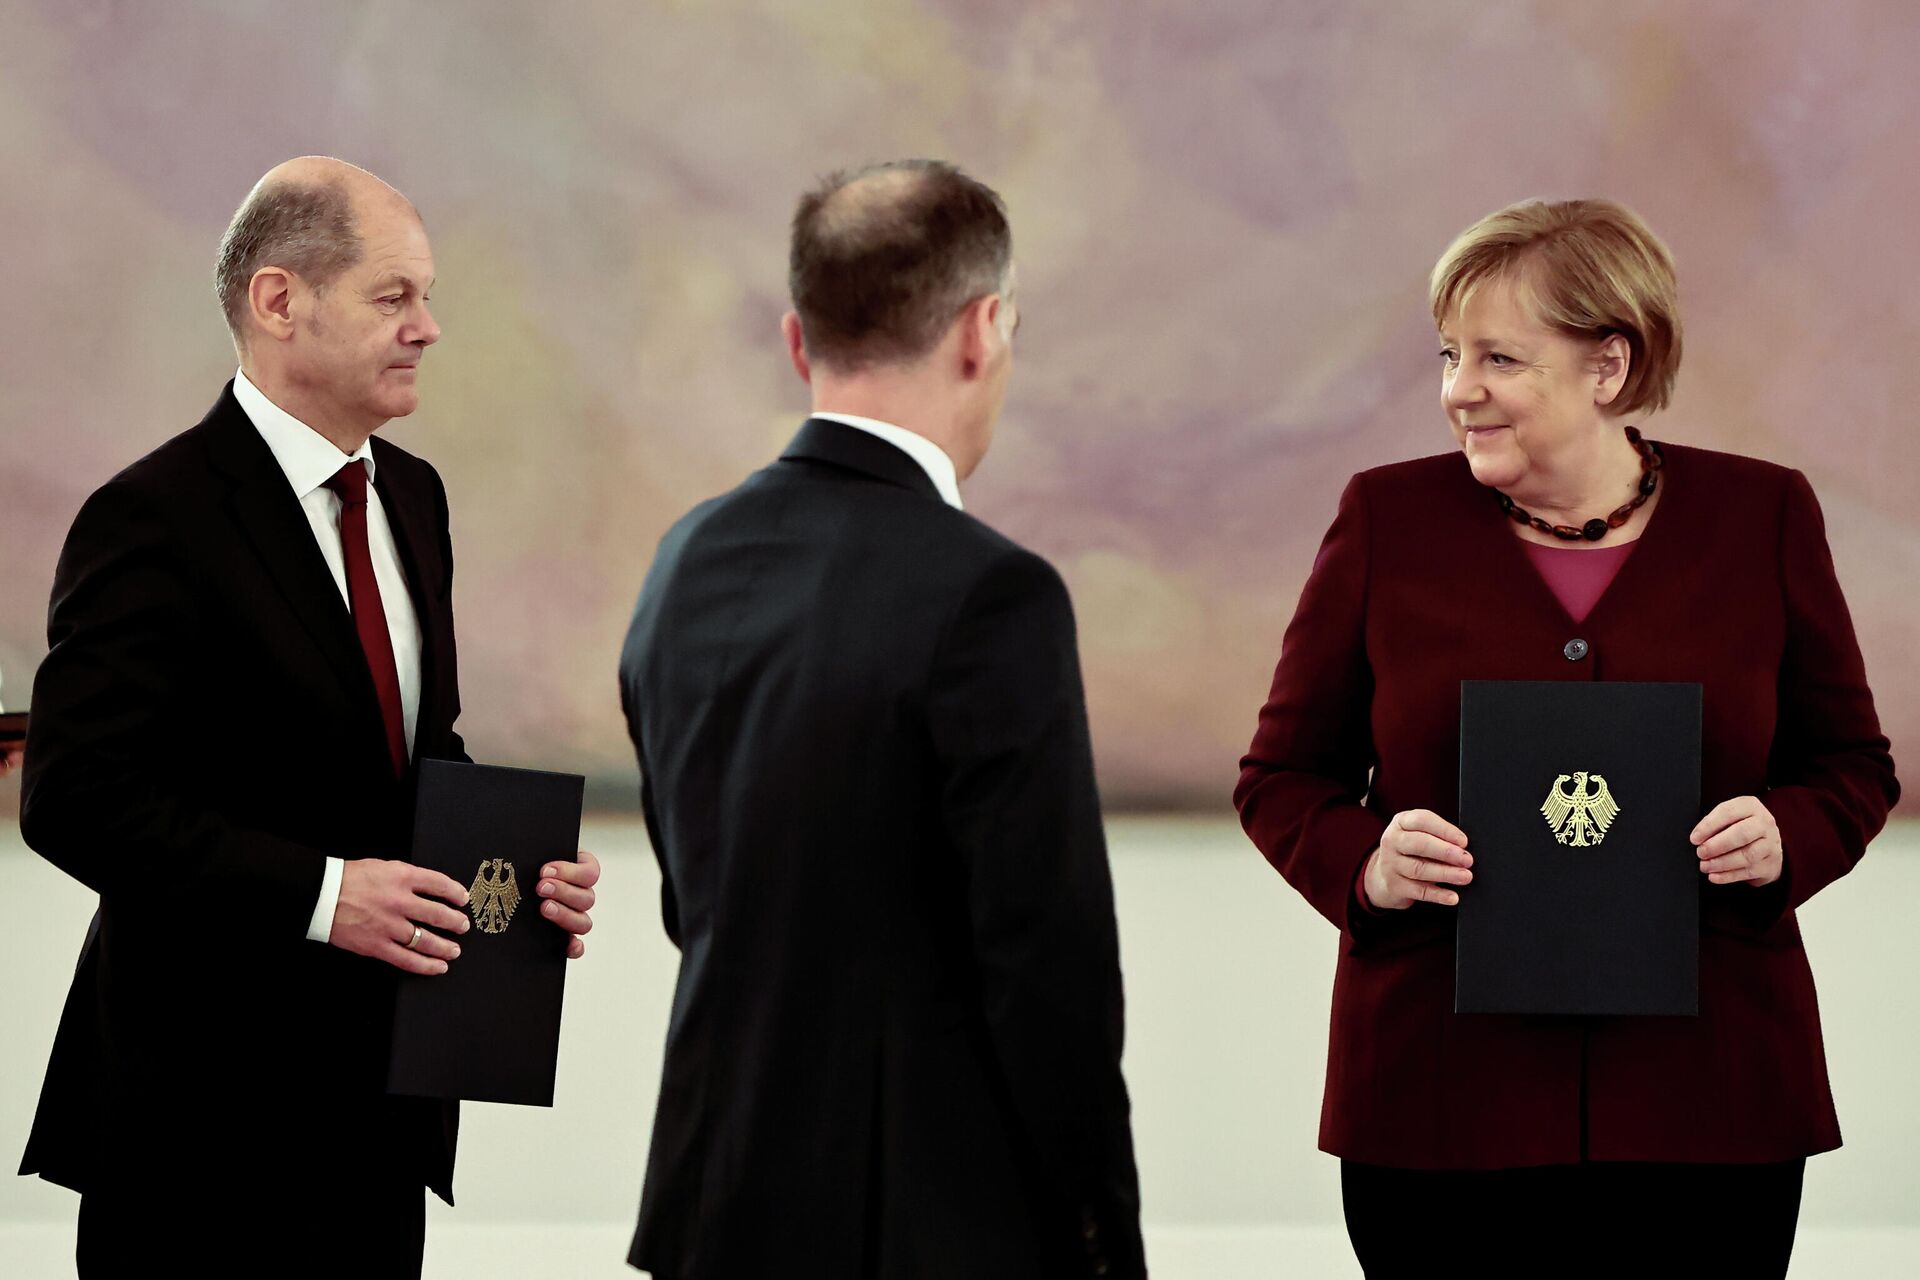 Social Democratic Party (SPD) candidate for Chancellor Olaf Scholz and Germany's acting Chancellor Angela Merkel hold their 'discharge certificates' at the Bellevue Palace in Berlin, Germany, October 26, 2021. REUTERS/Hannibal Hanschke - Sputnik International, 1920, 26.10.2021